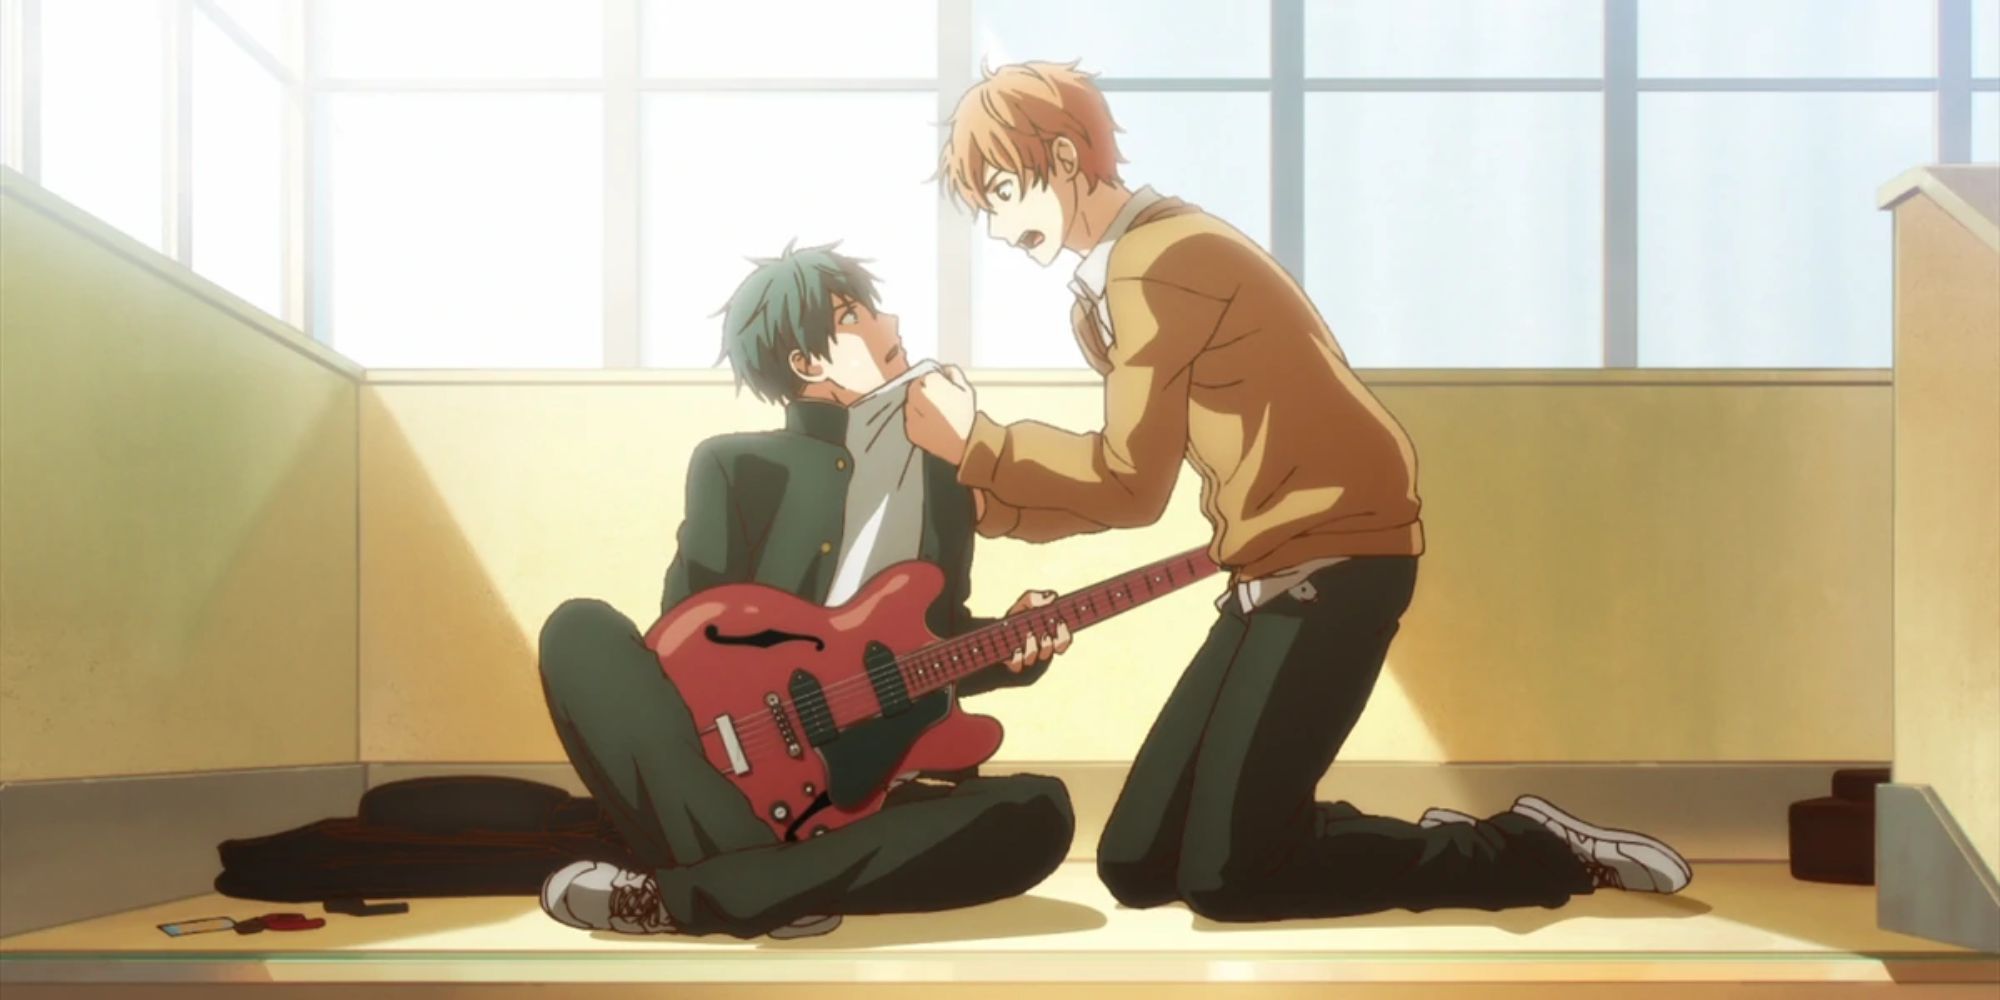 The Characters Sit On The Floor With A Guitar